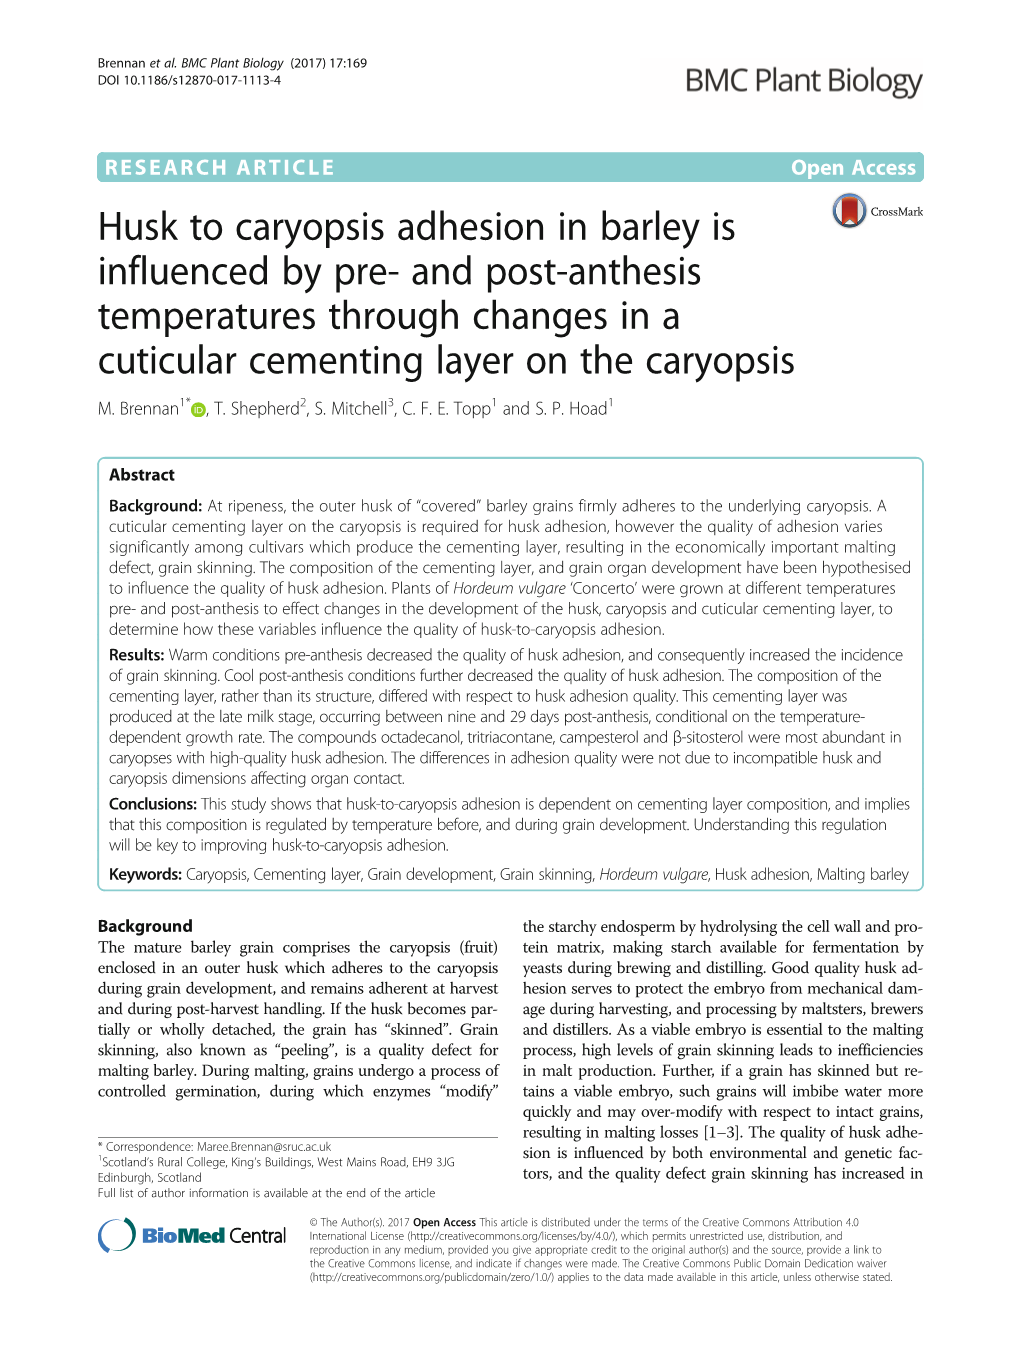 Husk to Caryopsis Adhesion in Barley Is Influenced by Pre- and Post-Anthesis Temperatures Through Changes in a Cuticular Cementing Layer on the Caryopsis M